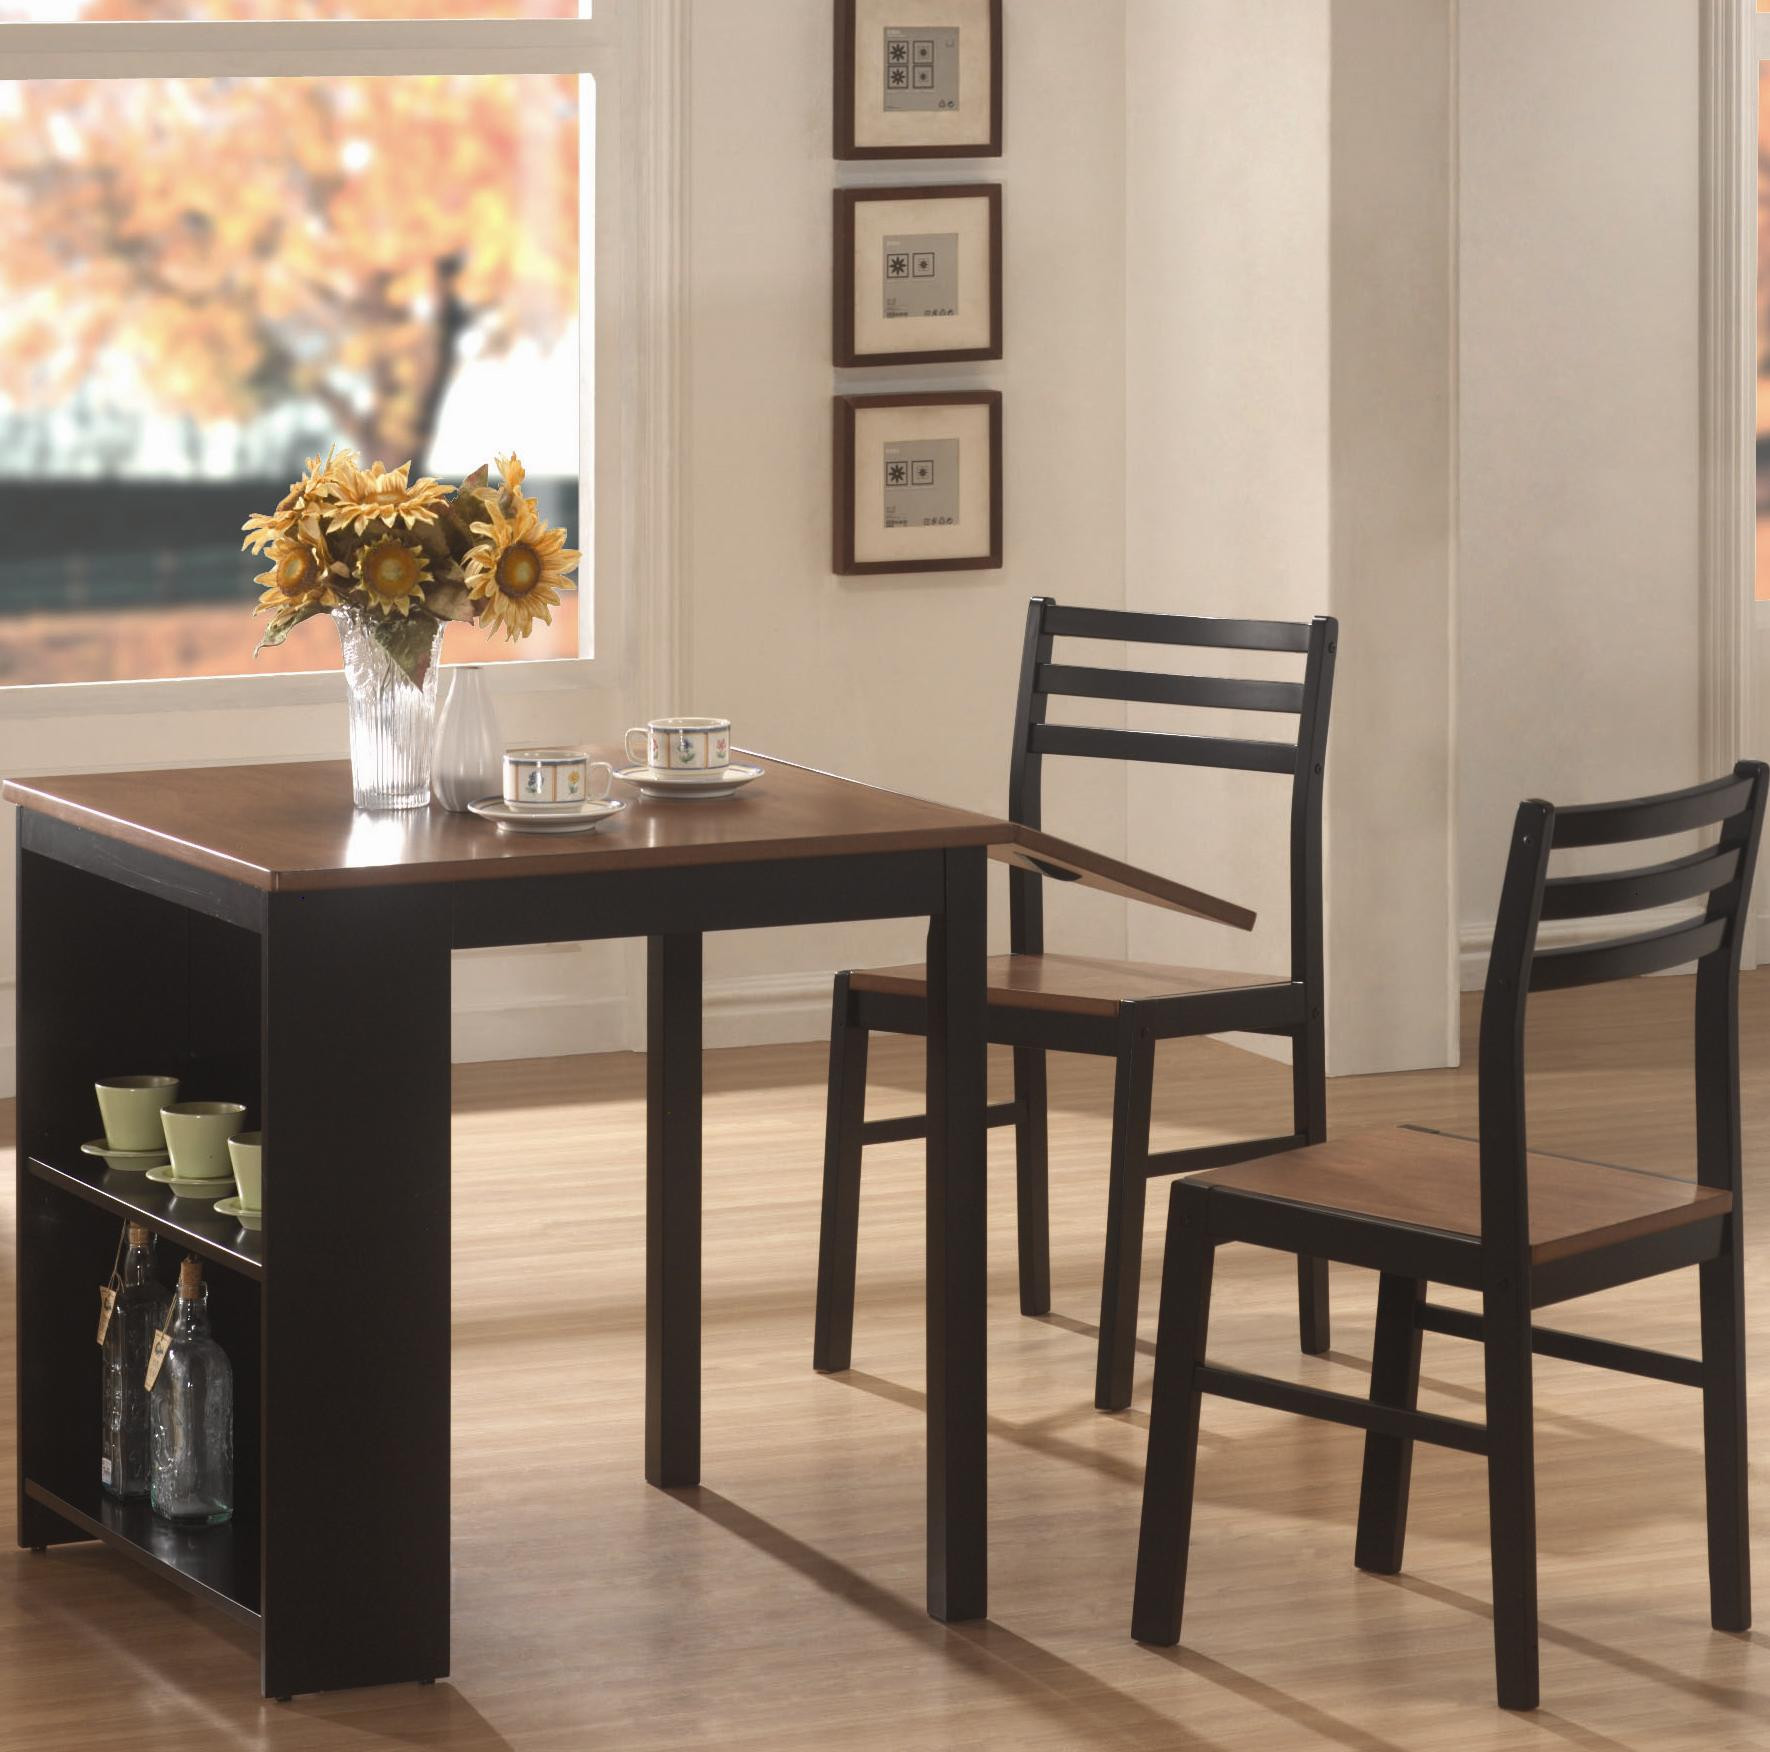 Small Kitchen Dinette Set
 Awesome Small Dining Sets 2 Small Kitchen Table Sets